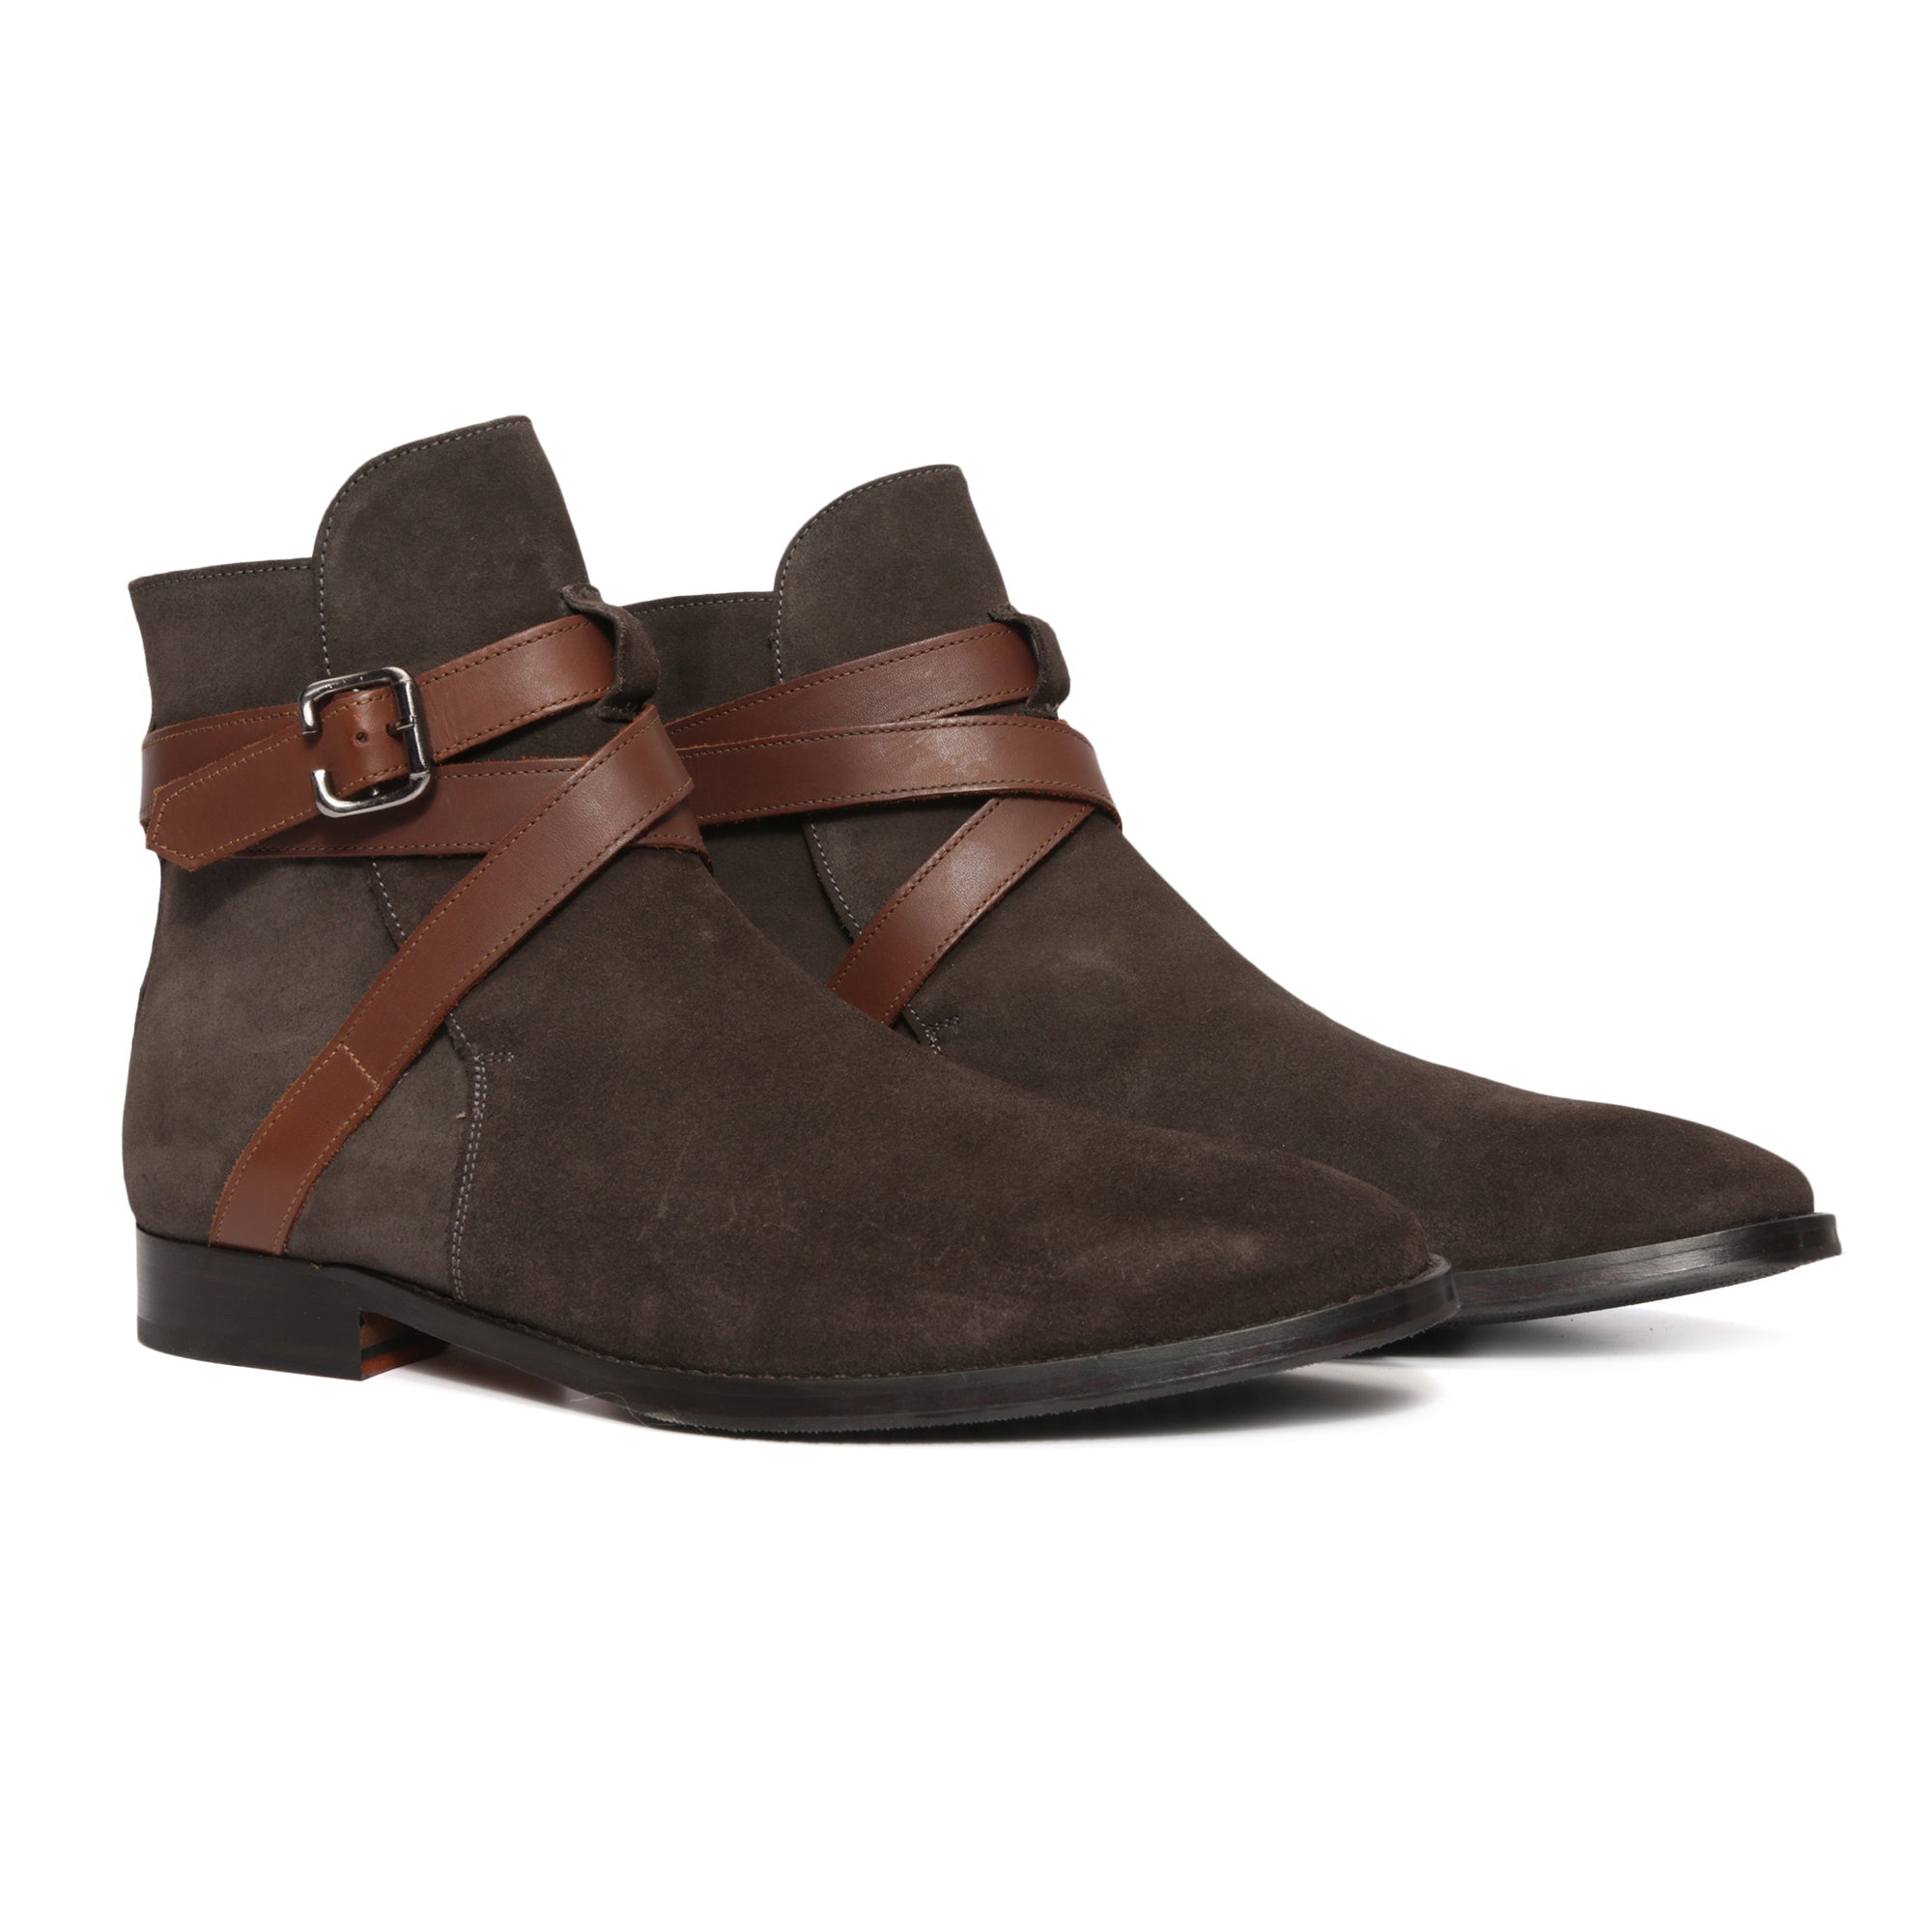 Brown Suede Jodhpur boots with Tan Straps : The Jodhpur boots ...